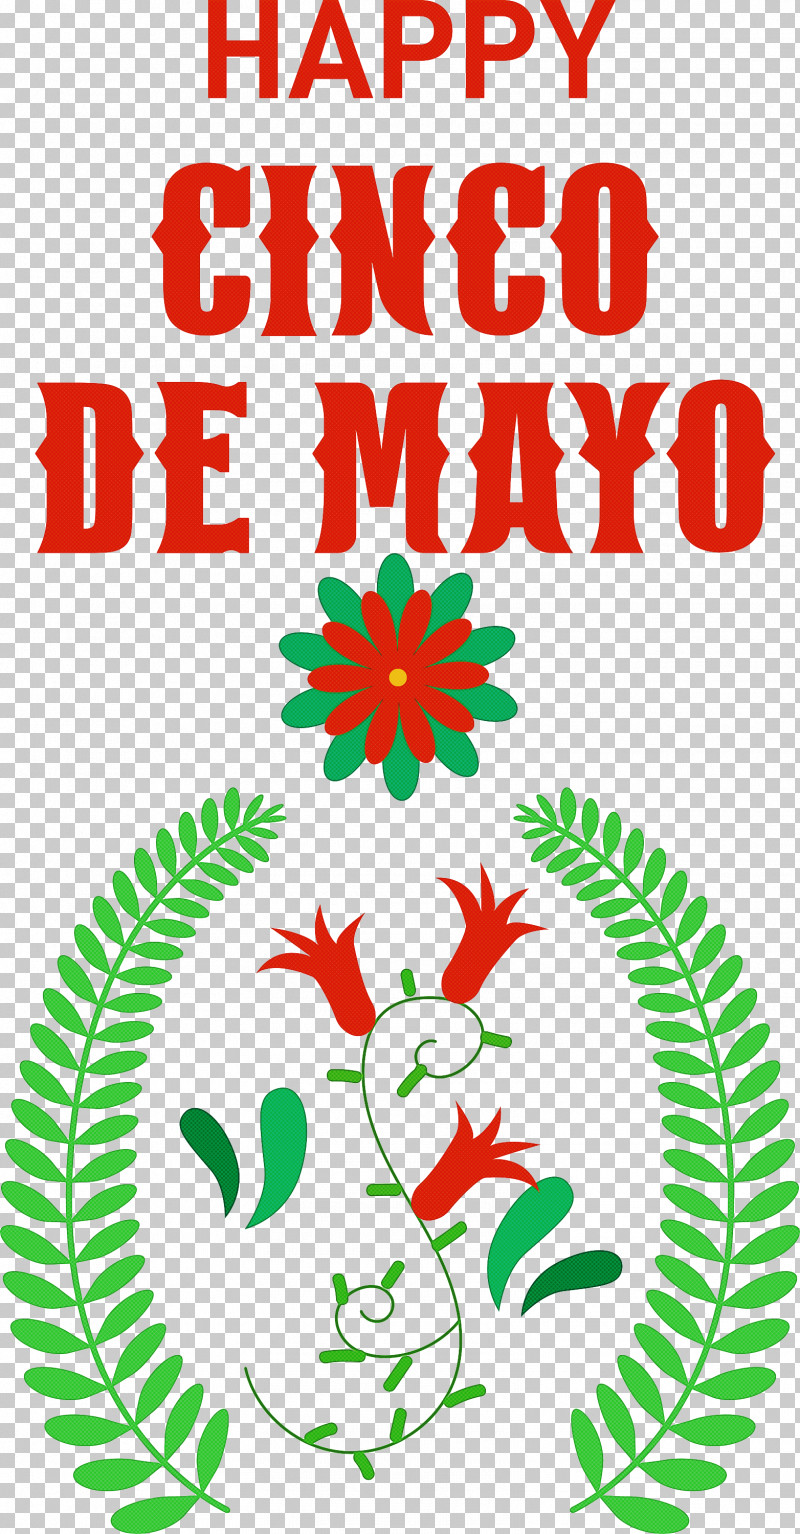 Cinco De Mayo Fifth Of May Mexico PNG, Clipart, Cinco De Mayo, Creativity, Fifth Of May, Floral Design, Leaf Free PNG Download